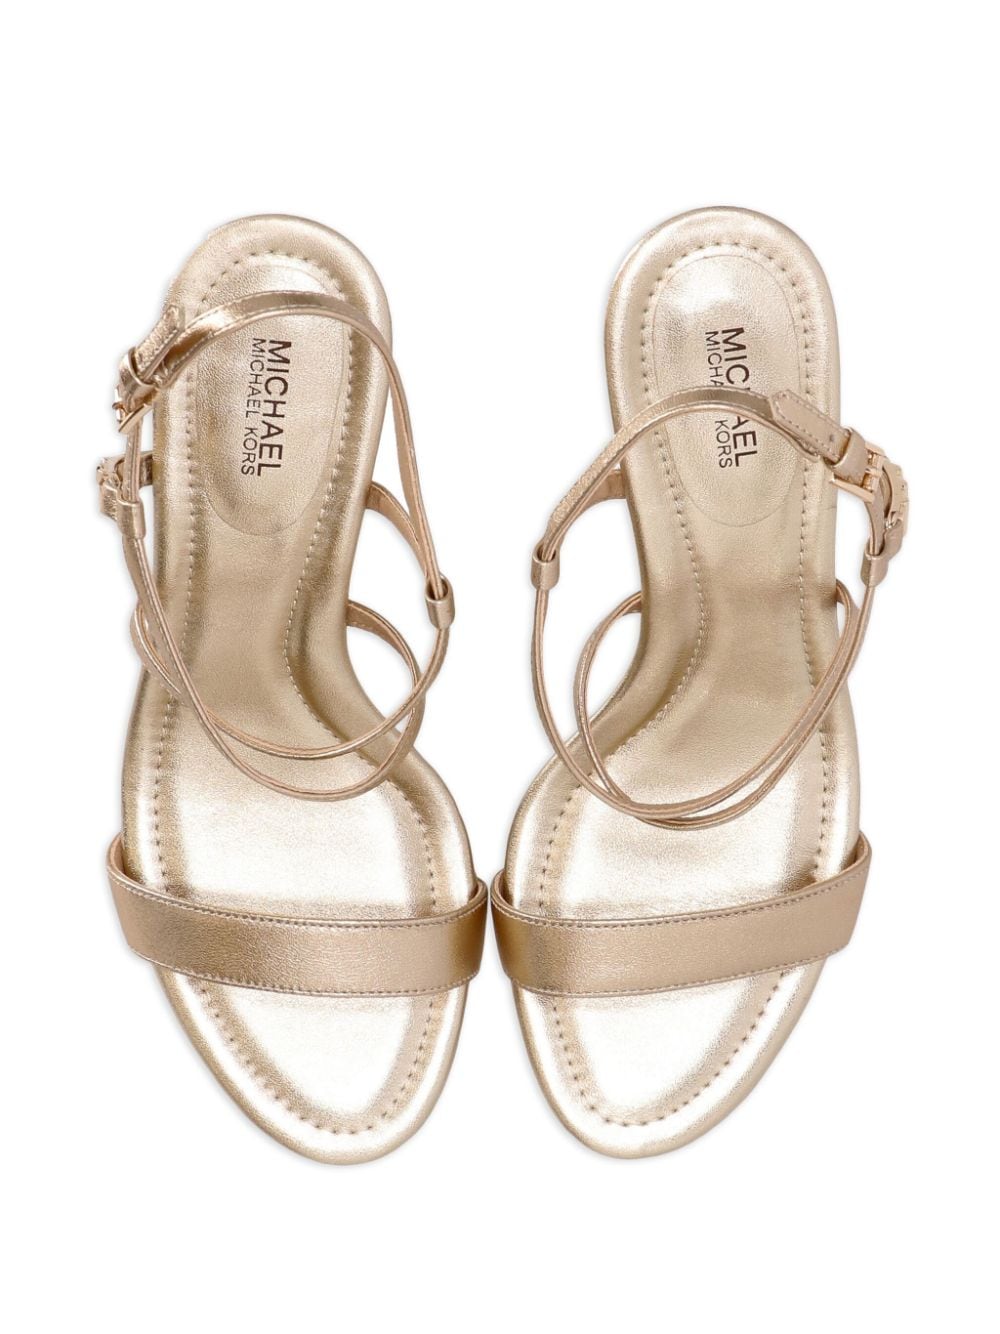 Shop Michael Kors Veronica 100mm Leather Sandals In Gold